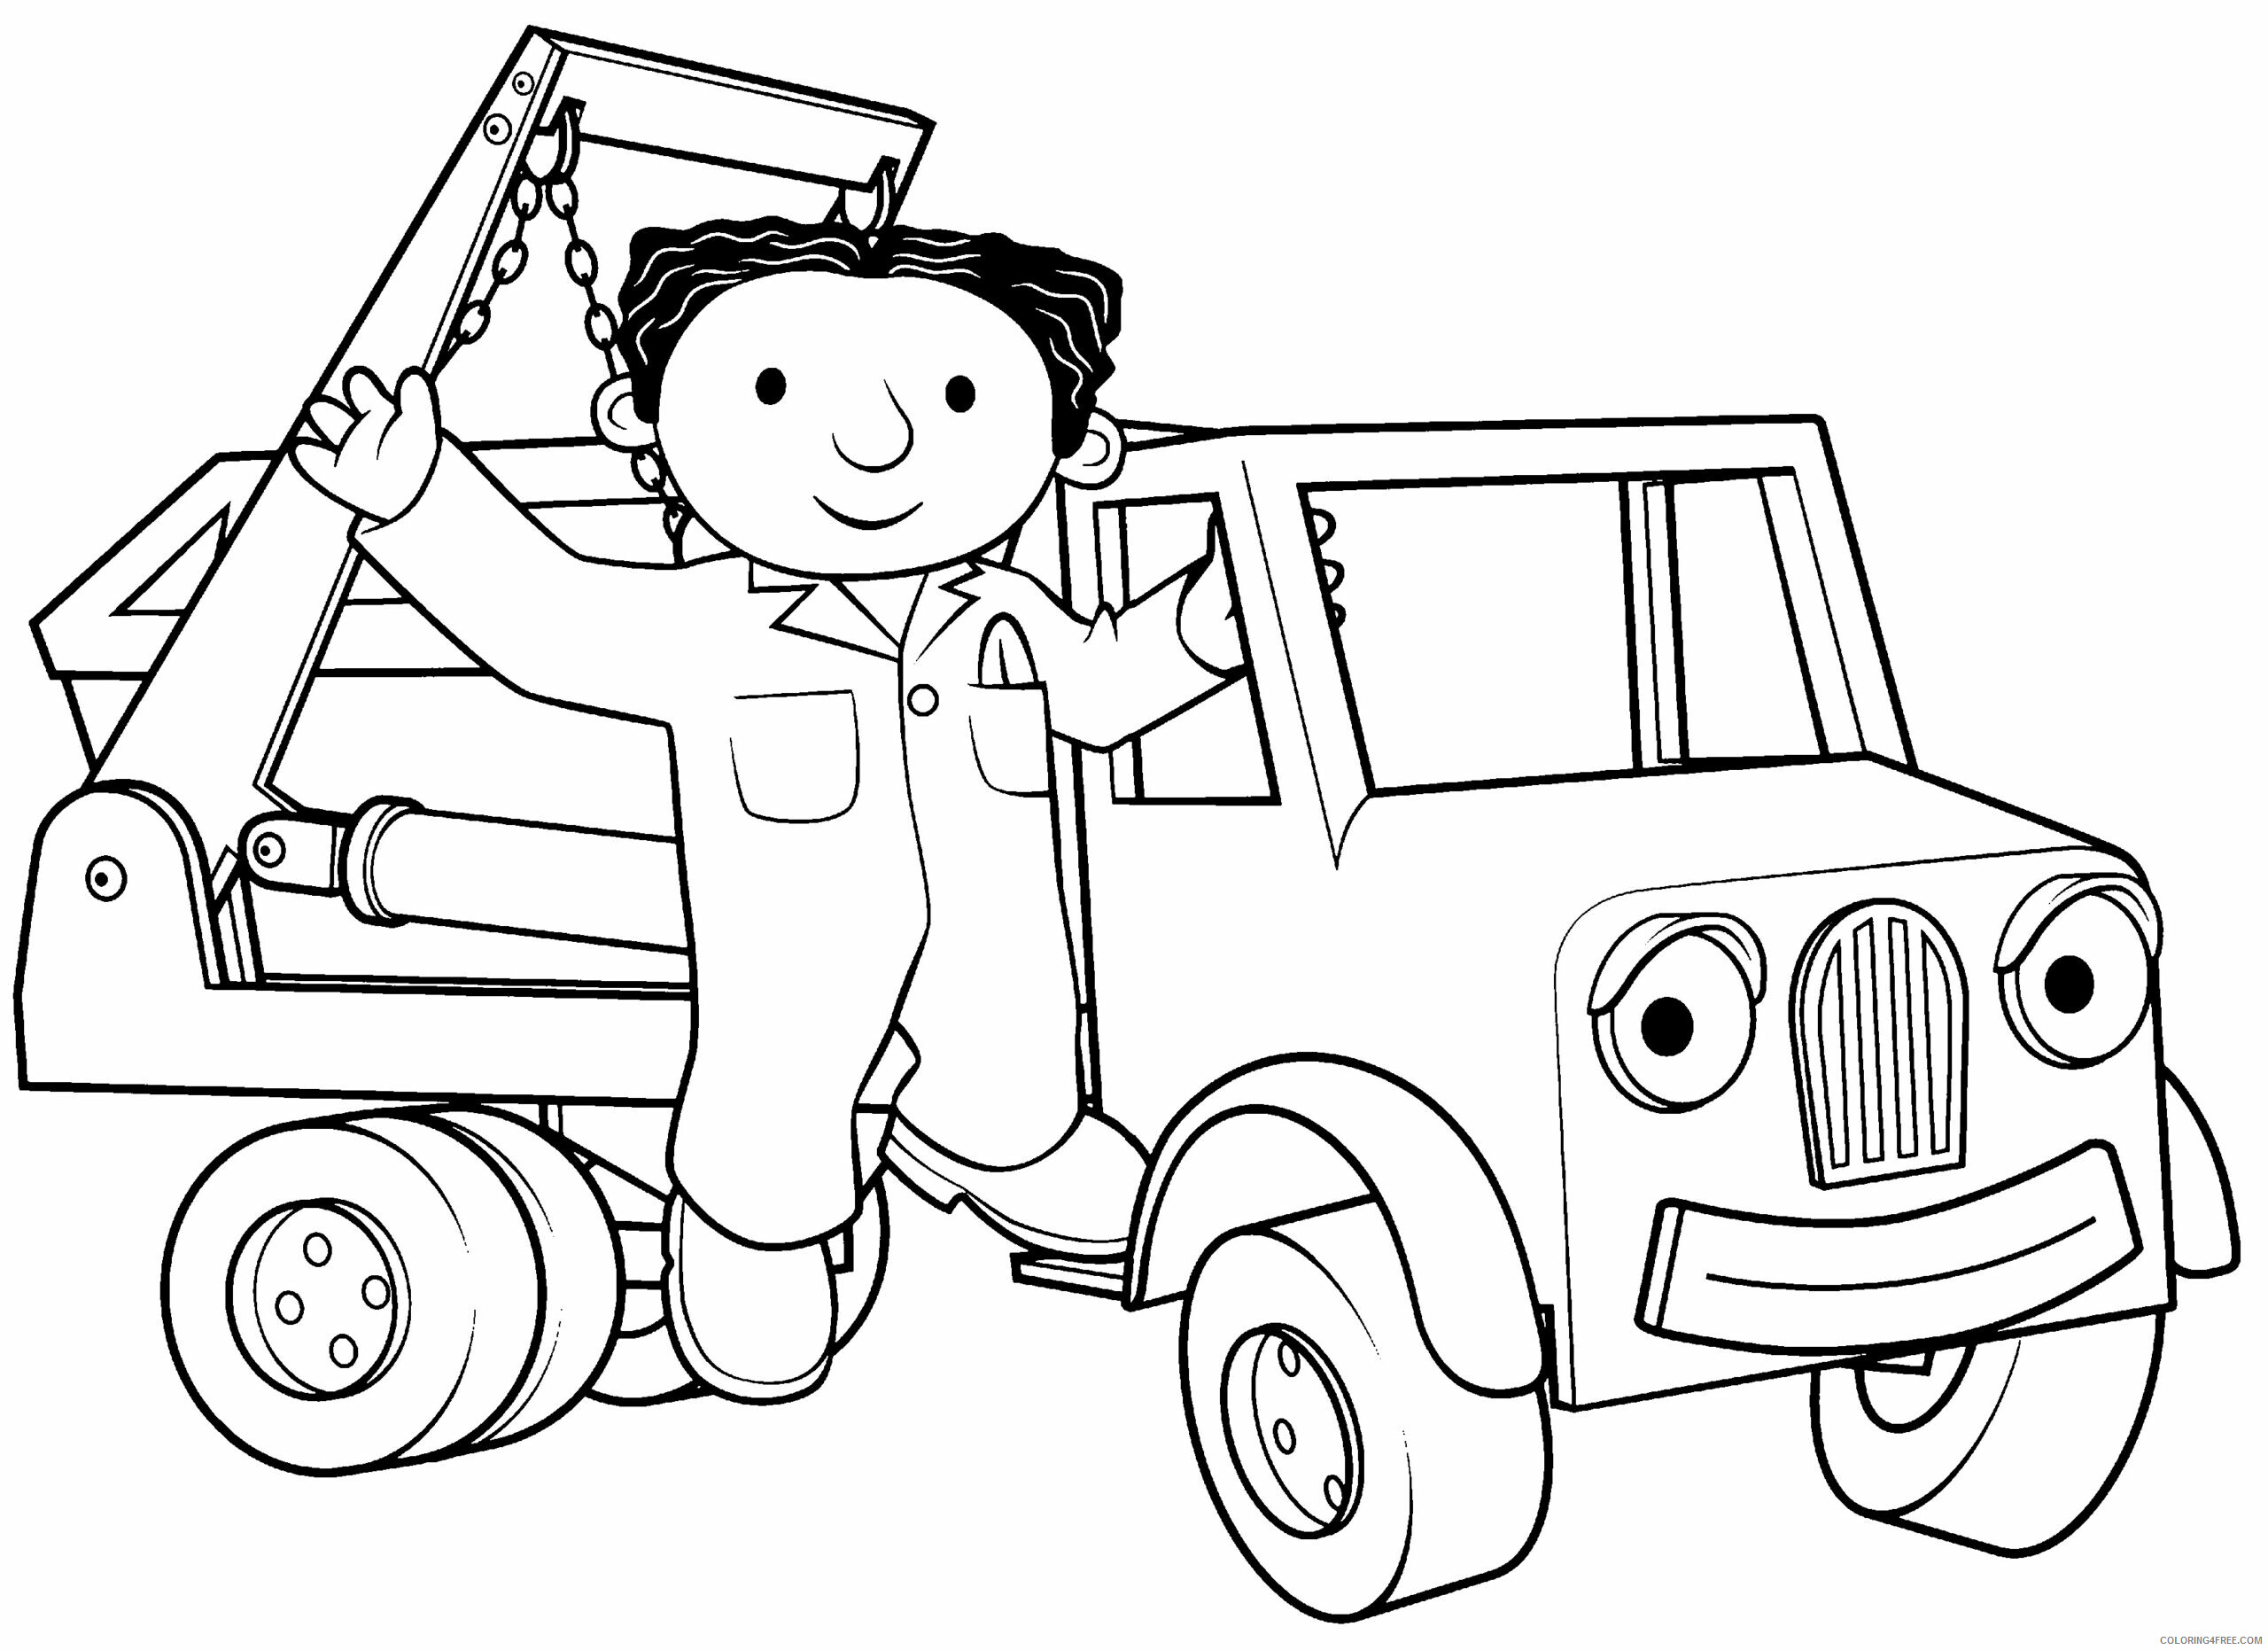 Bob the Builder Coloring Pages TV Film bob the builder 11 2 Printable 2020 01012 Coloring4free